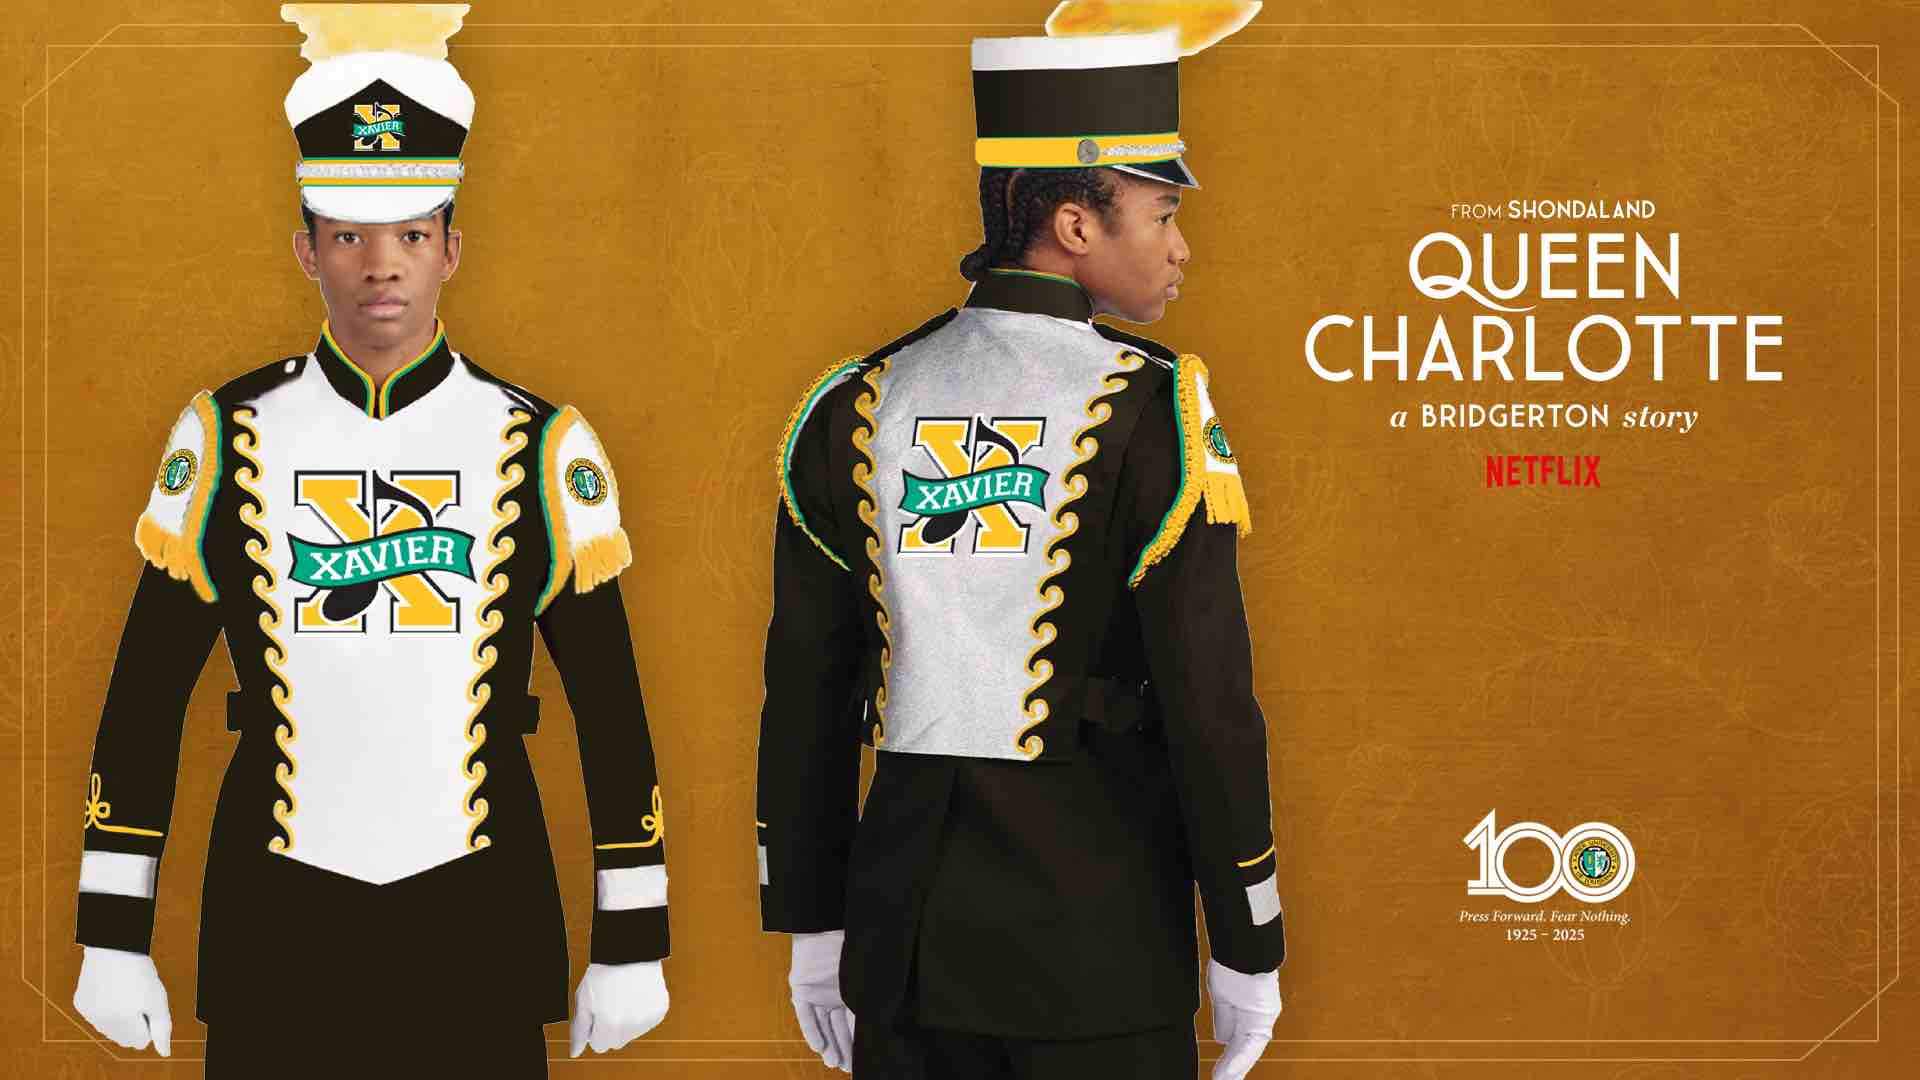 xula the “diamond of the season,” was gifted brand-new band uniforms during Spring Waltz celebrating upcoming “Queen Charlotte: A Bridgerton Story”